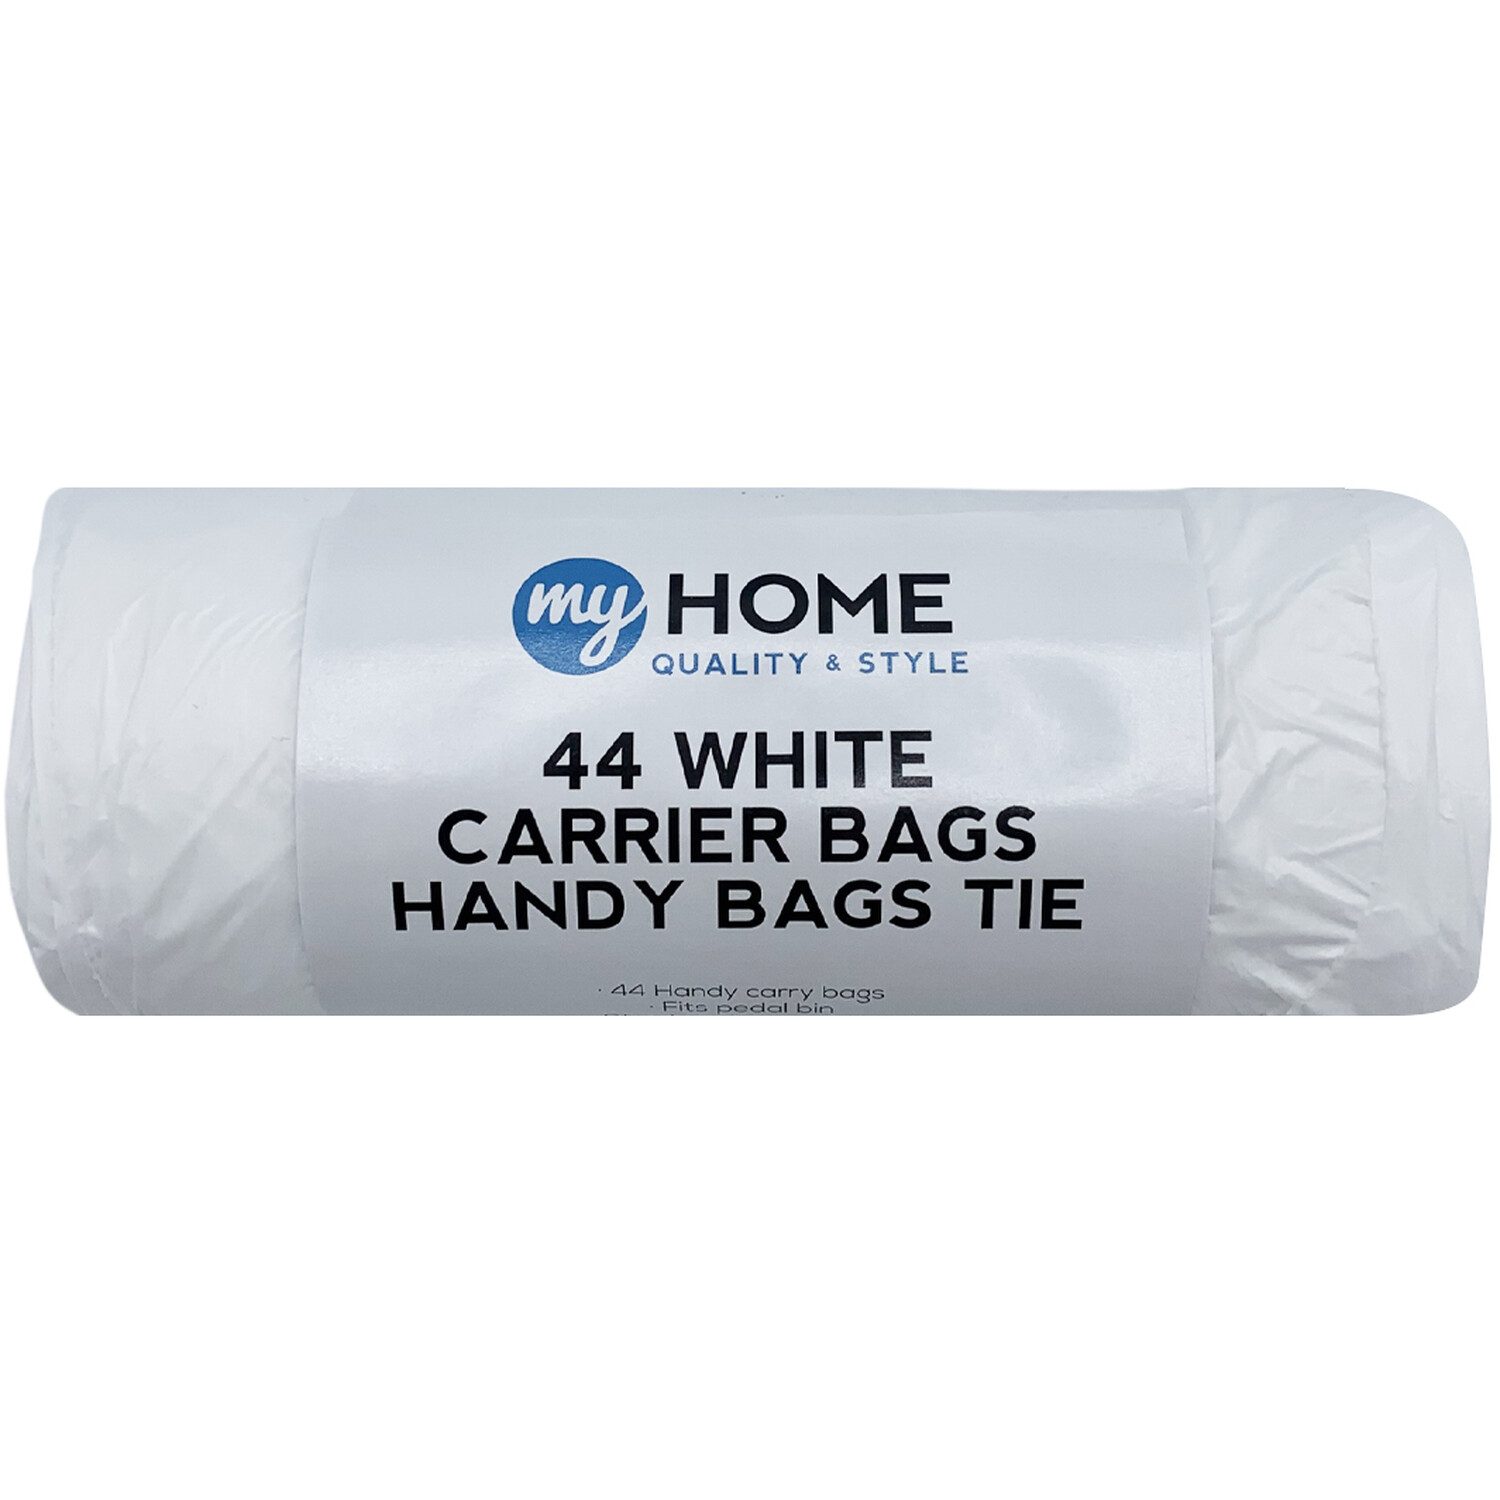 Pack of 44 Tie Handled Carrier Bags - White Image